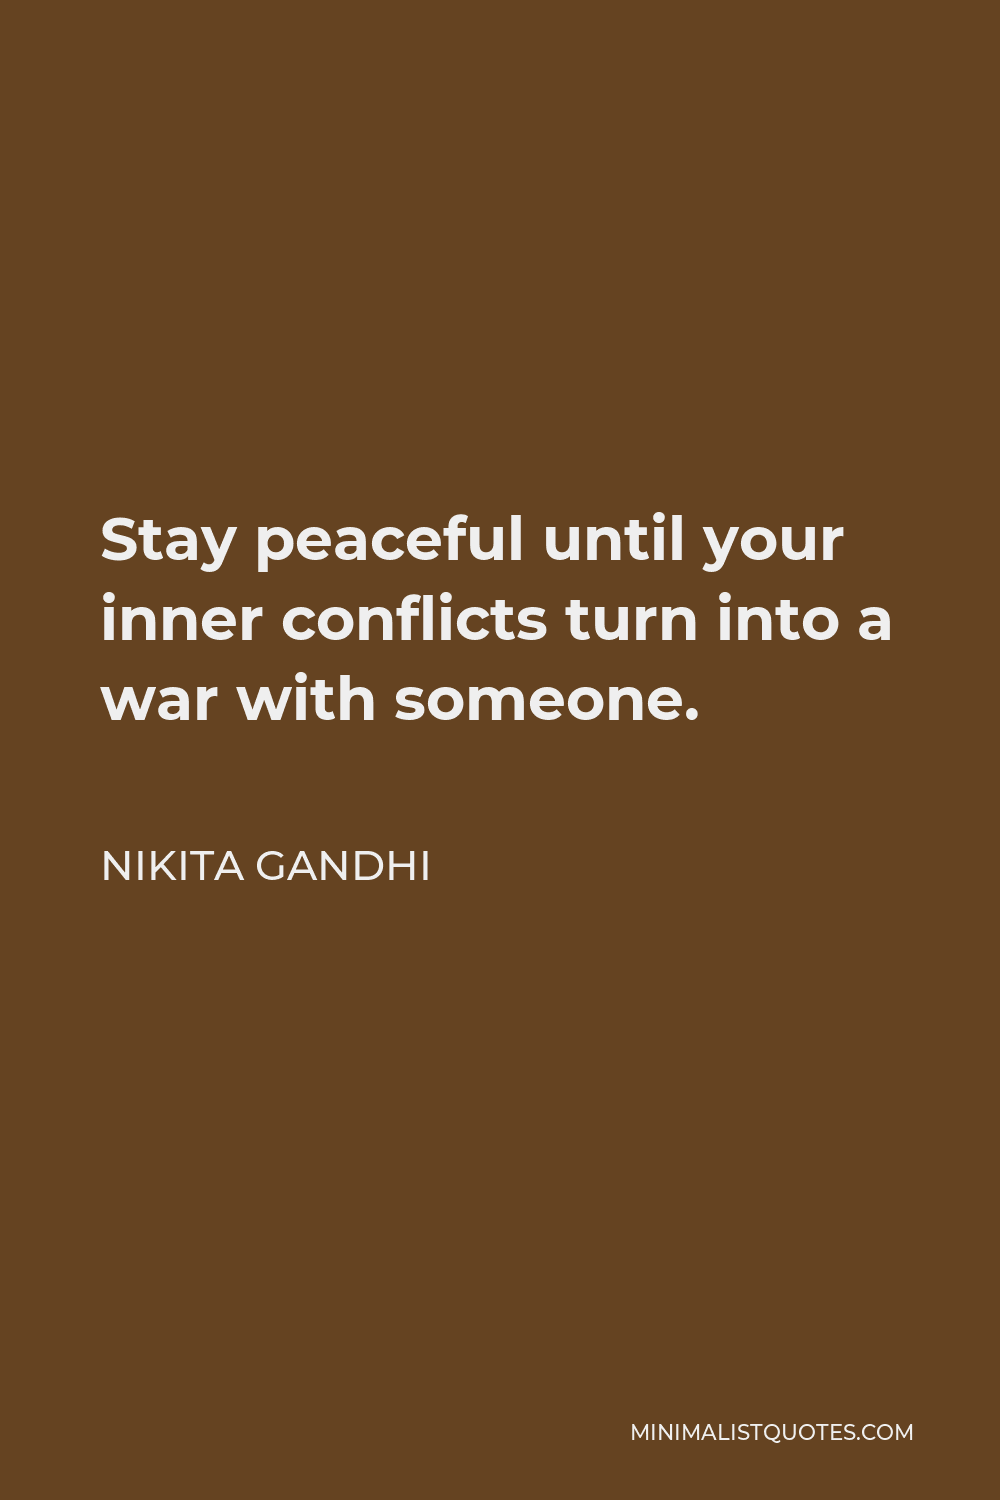 Nikita Gandhi Quote - Stay peaceful until your inner conflicts turn into a war with someone.